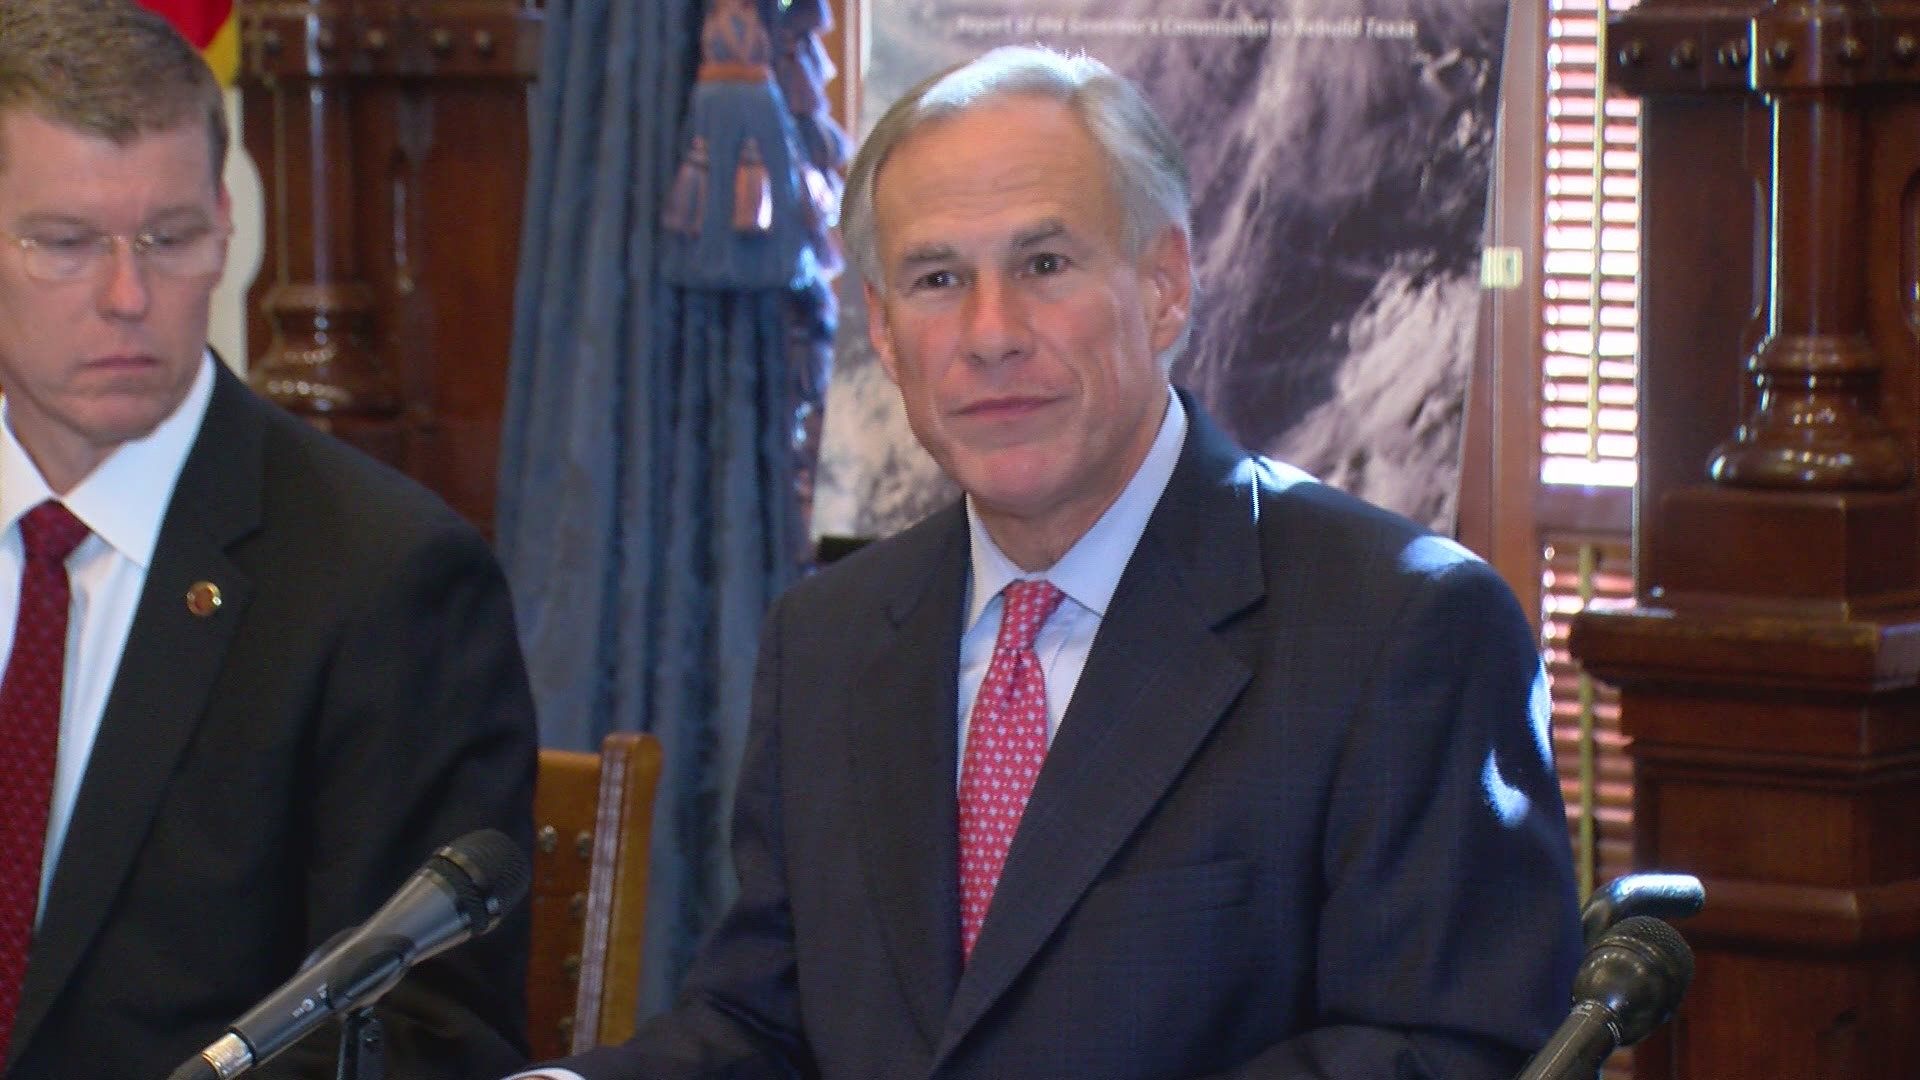 Governor Greg Abbott's Commission to Rebuild Texas Thursday offered to the Texas Legislature wide-ranging recommendations to help Texas better prepare for future catastrophic storms in the wake of Hurricane Harvey.